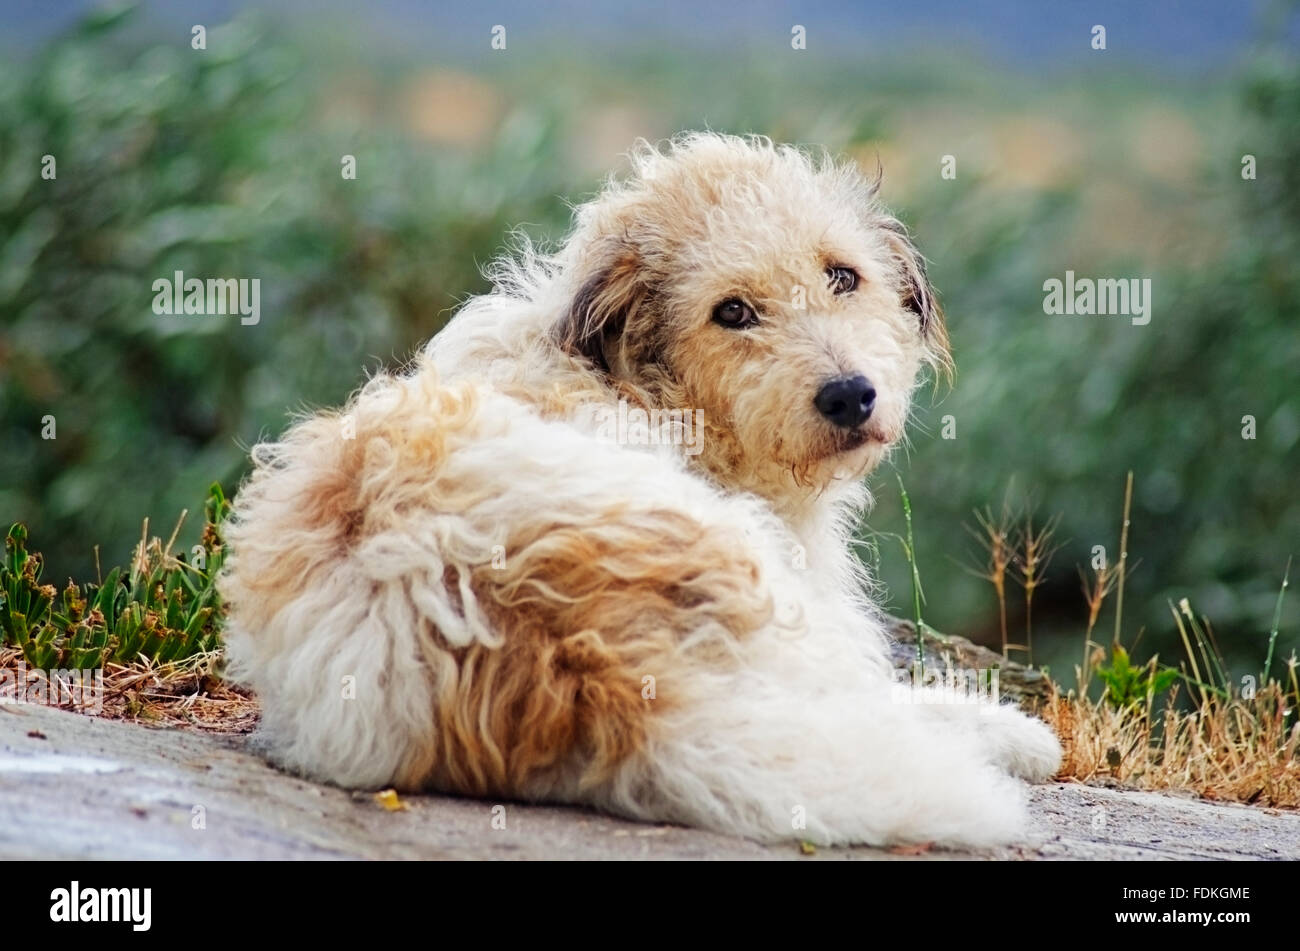 Rear view of a Terrier lying down and looking back at camera Stock Photo